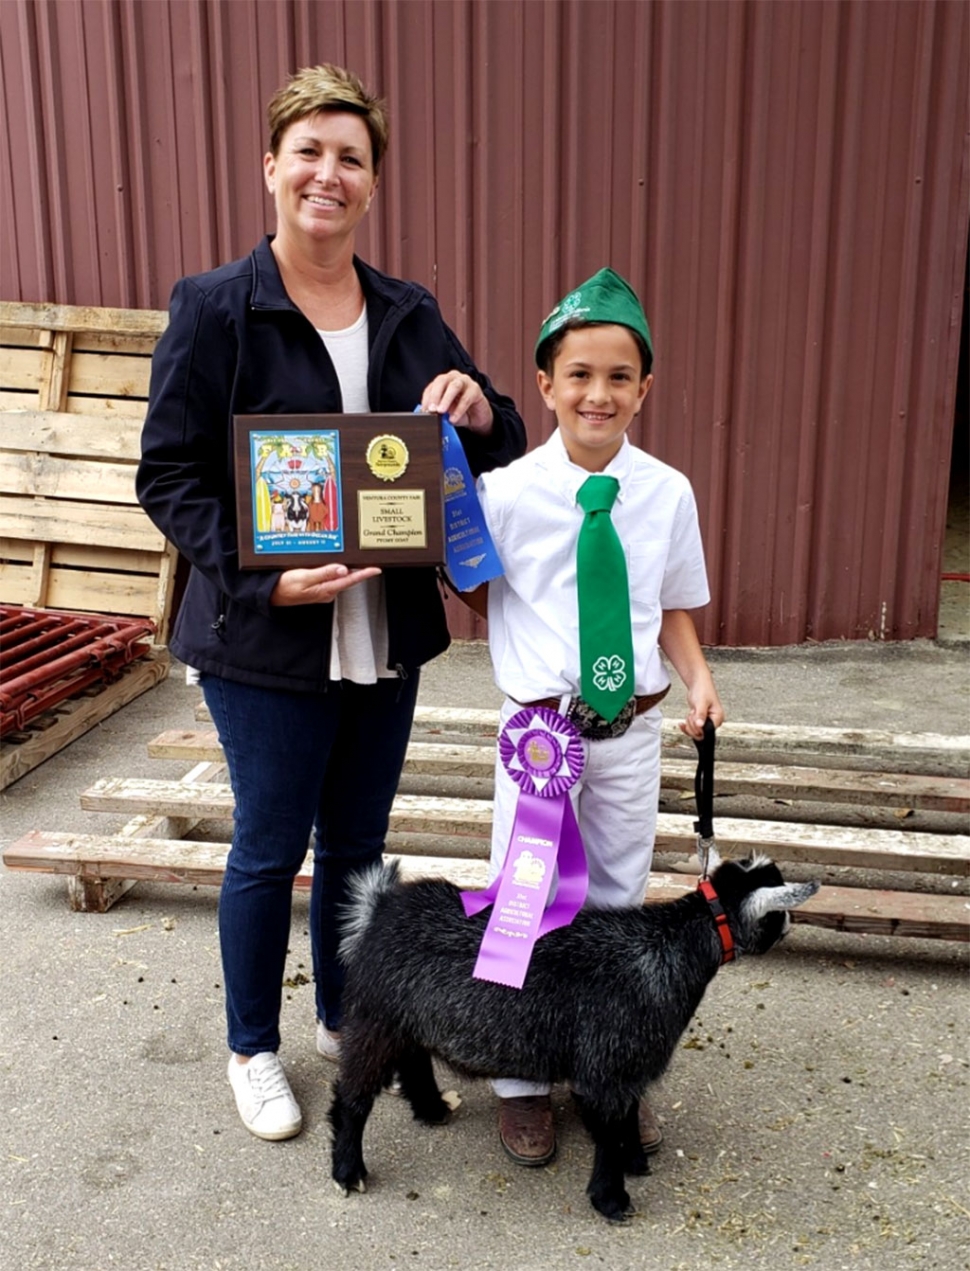 Pictured is Ethan Zavala of Sespe 4H who won Supreme Grand Champion, with his Registered Pygmy Goat at this year’s Ventura County Fair Small Livestock Show. Pictured with Ethan is project leader Kerrie Allen.